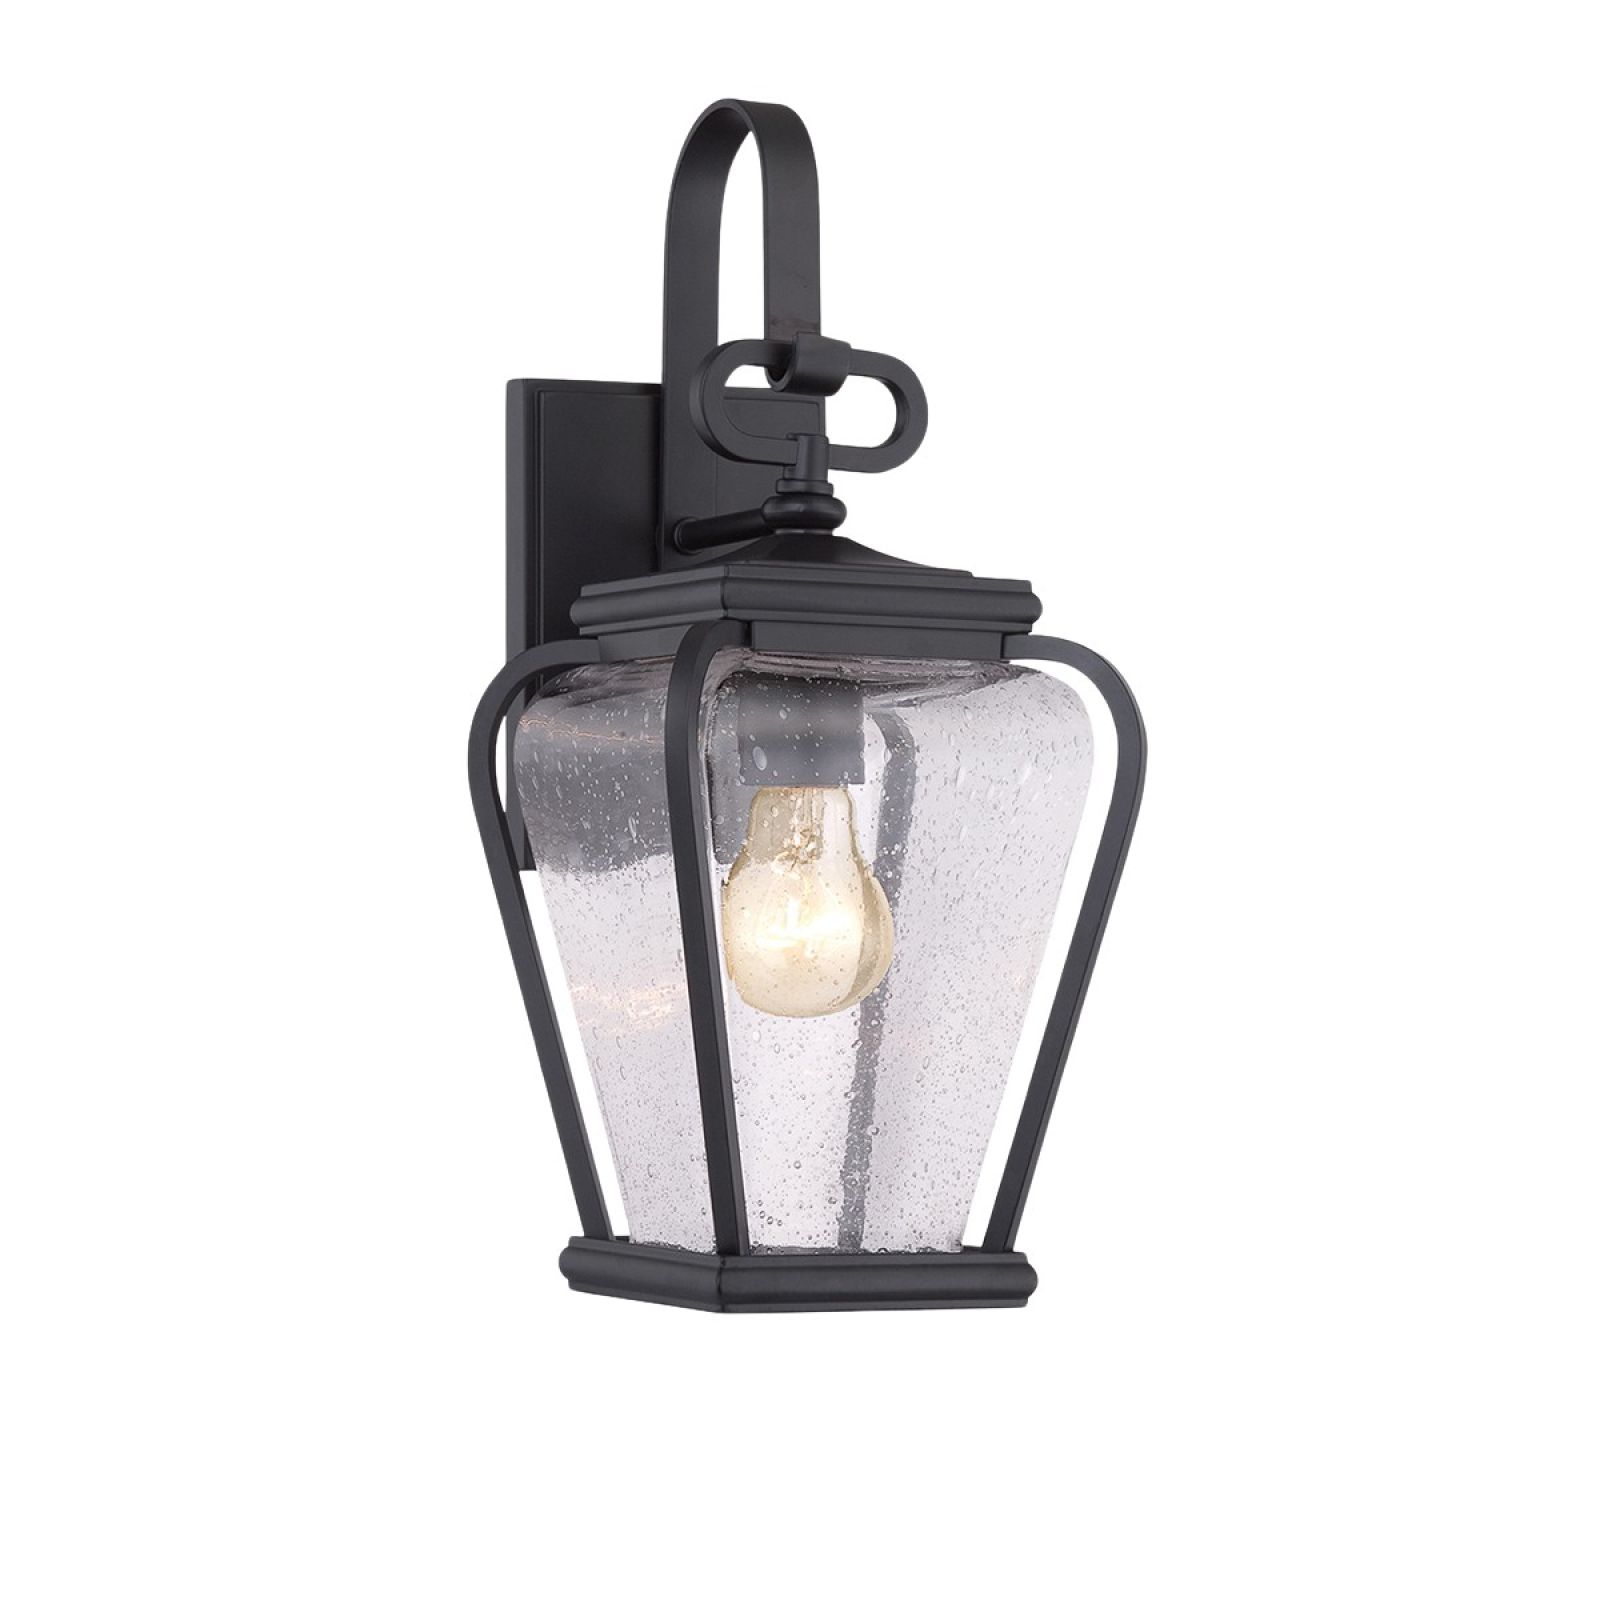 Province small wall lantern in Black